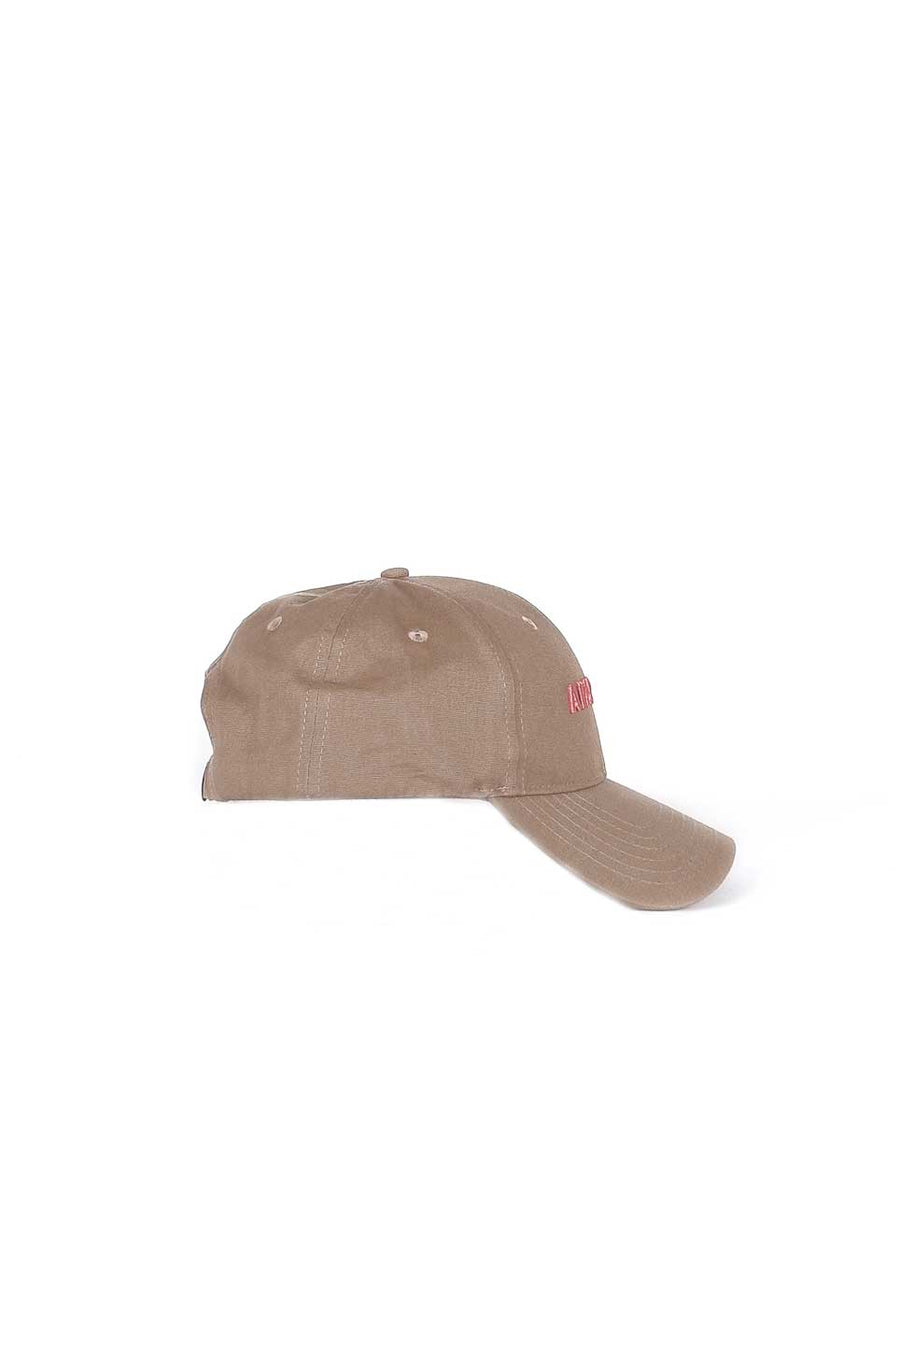 Buy the A Paper Kid Baseball Cap Taupe at Intro. Spend £50 for free UK delivery. Official stockists. We ship worldwide.